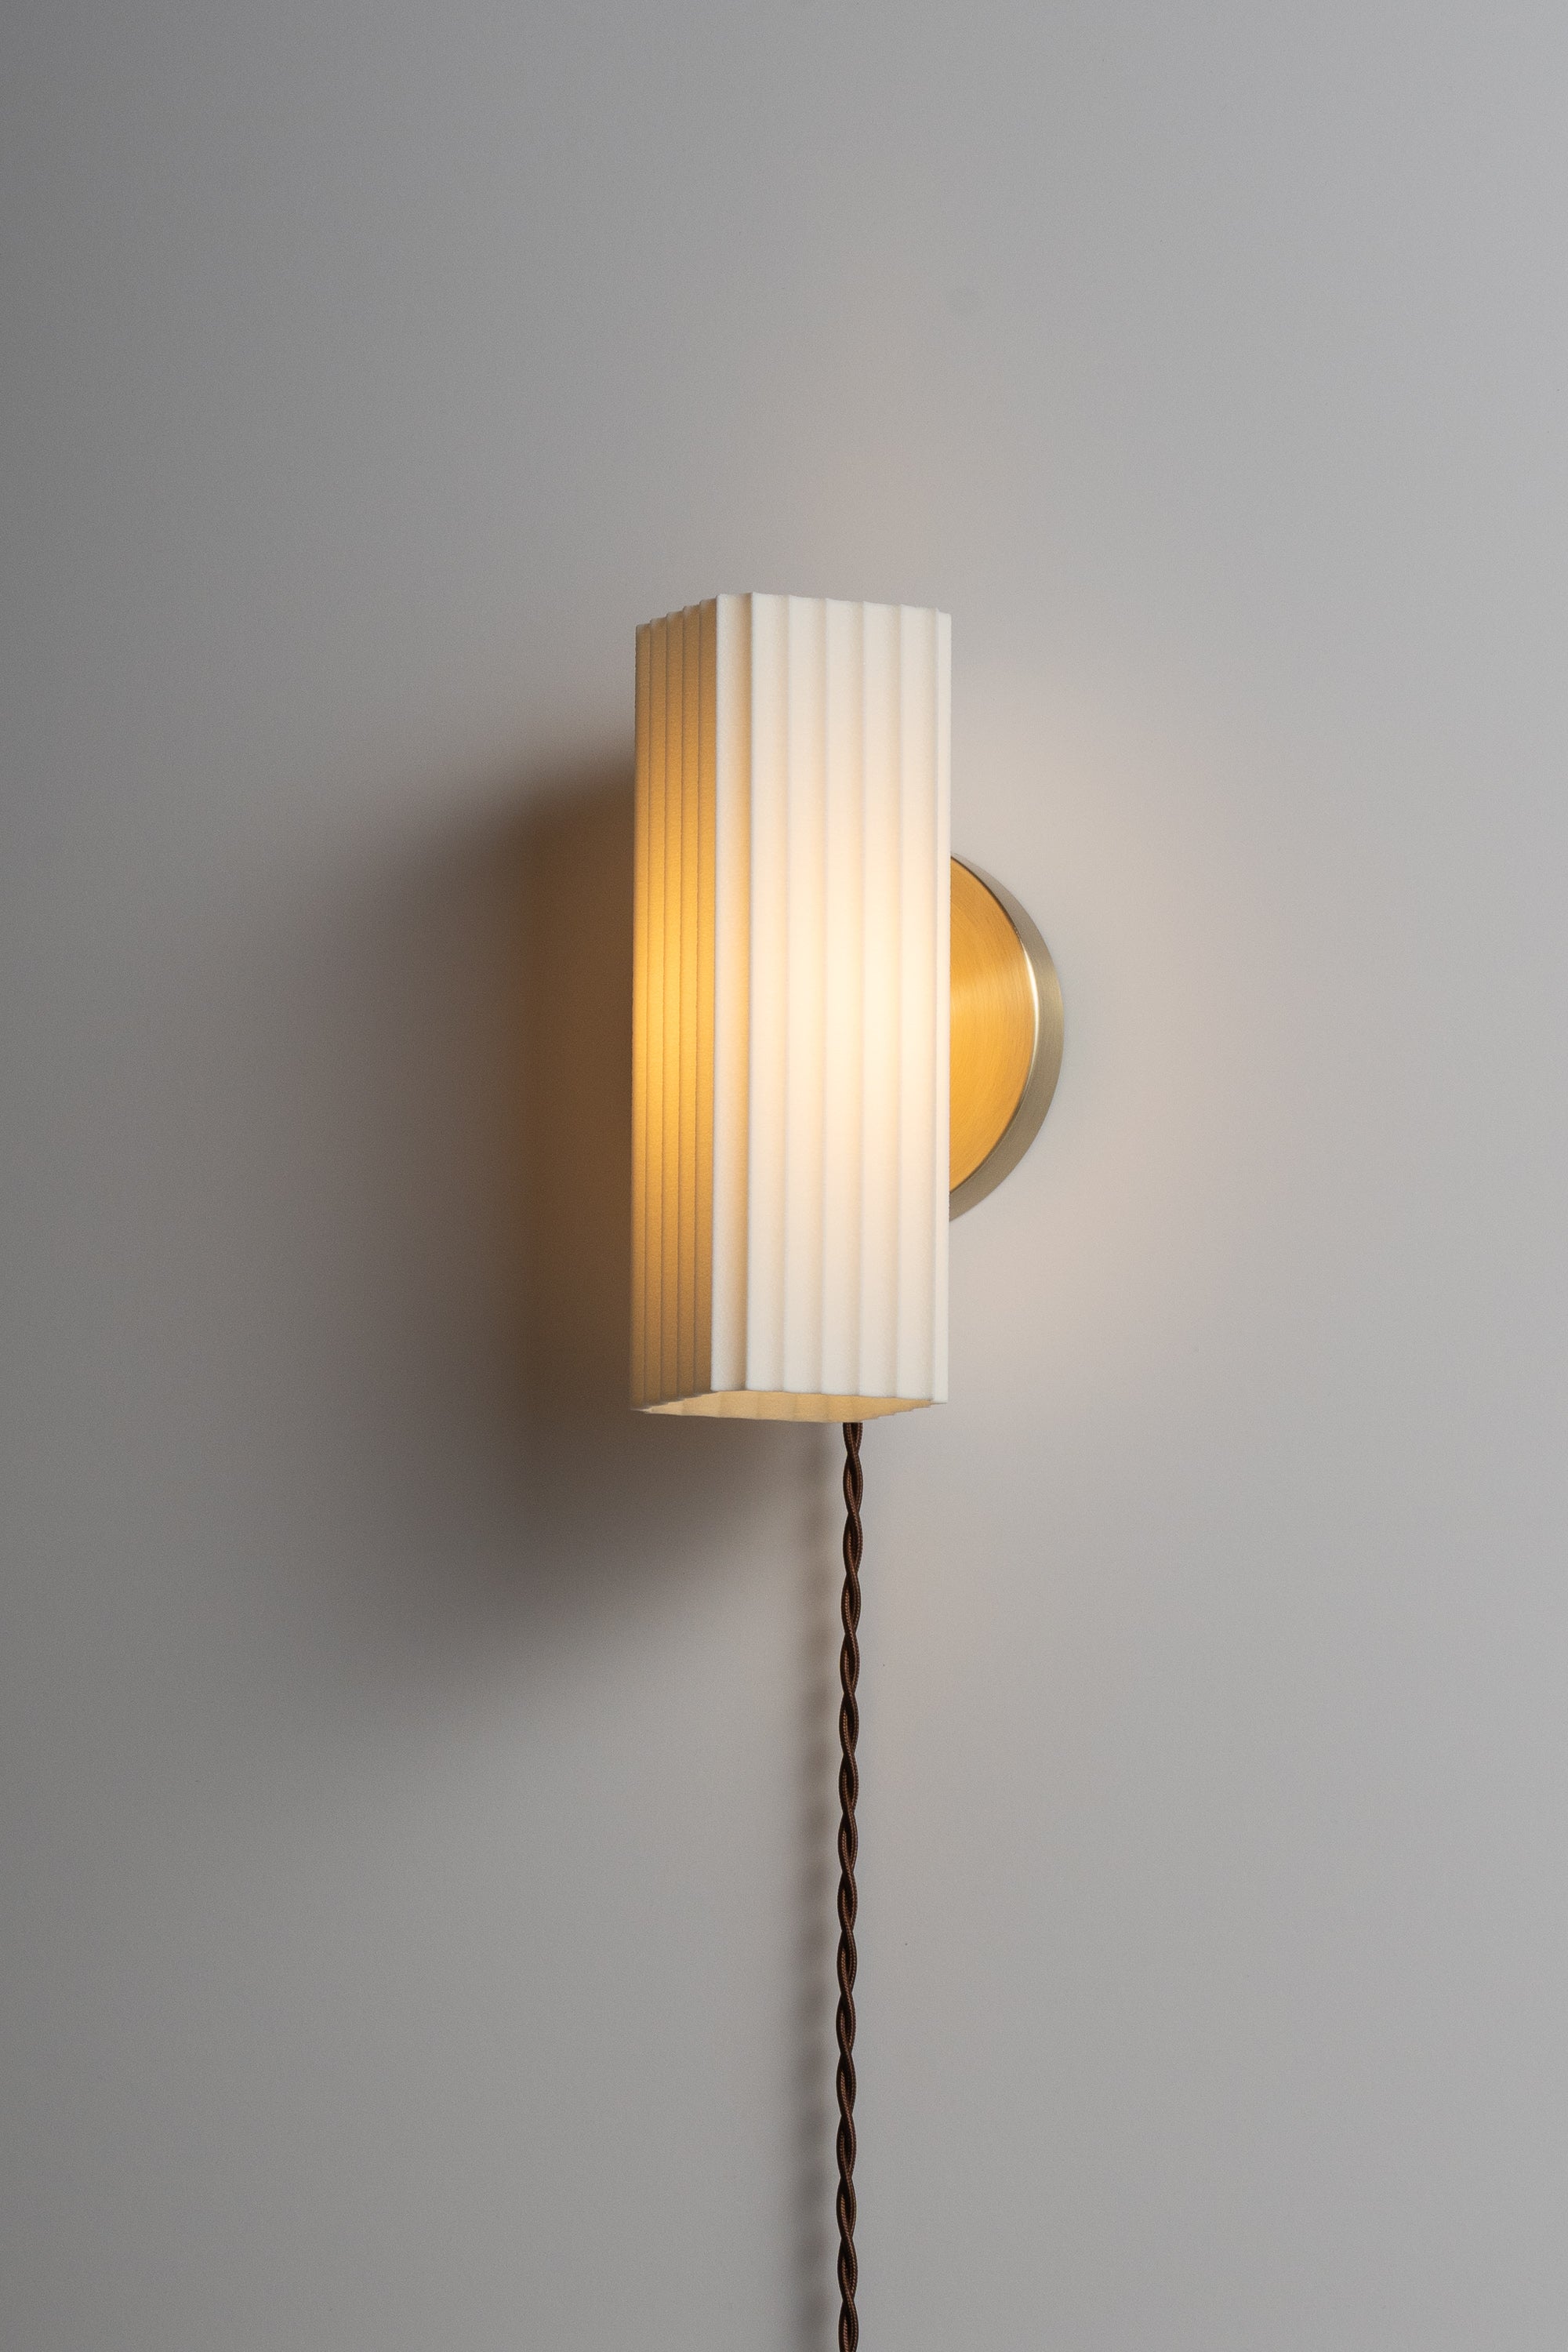 SQ Sconce Wired Plug-in